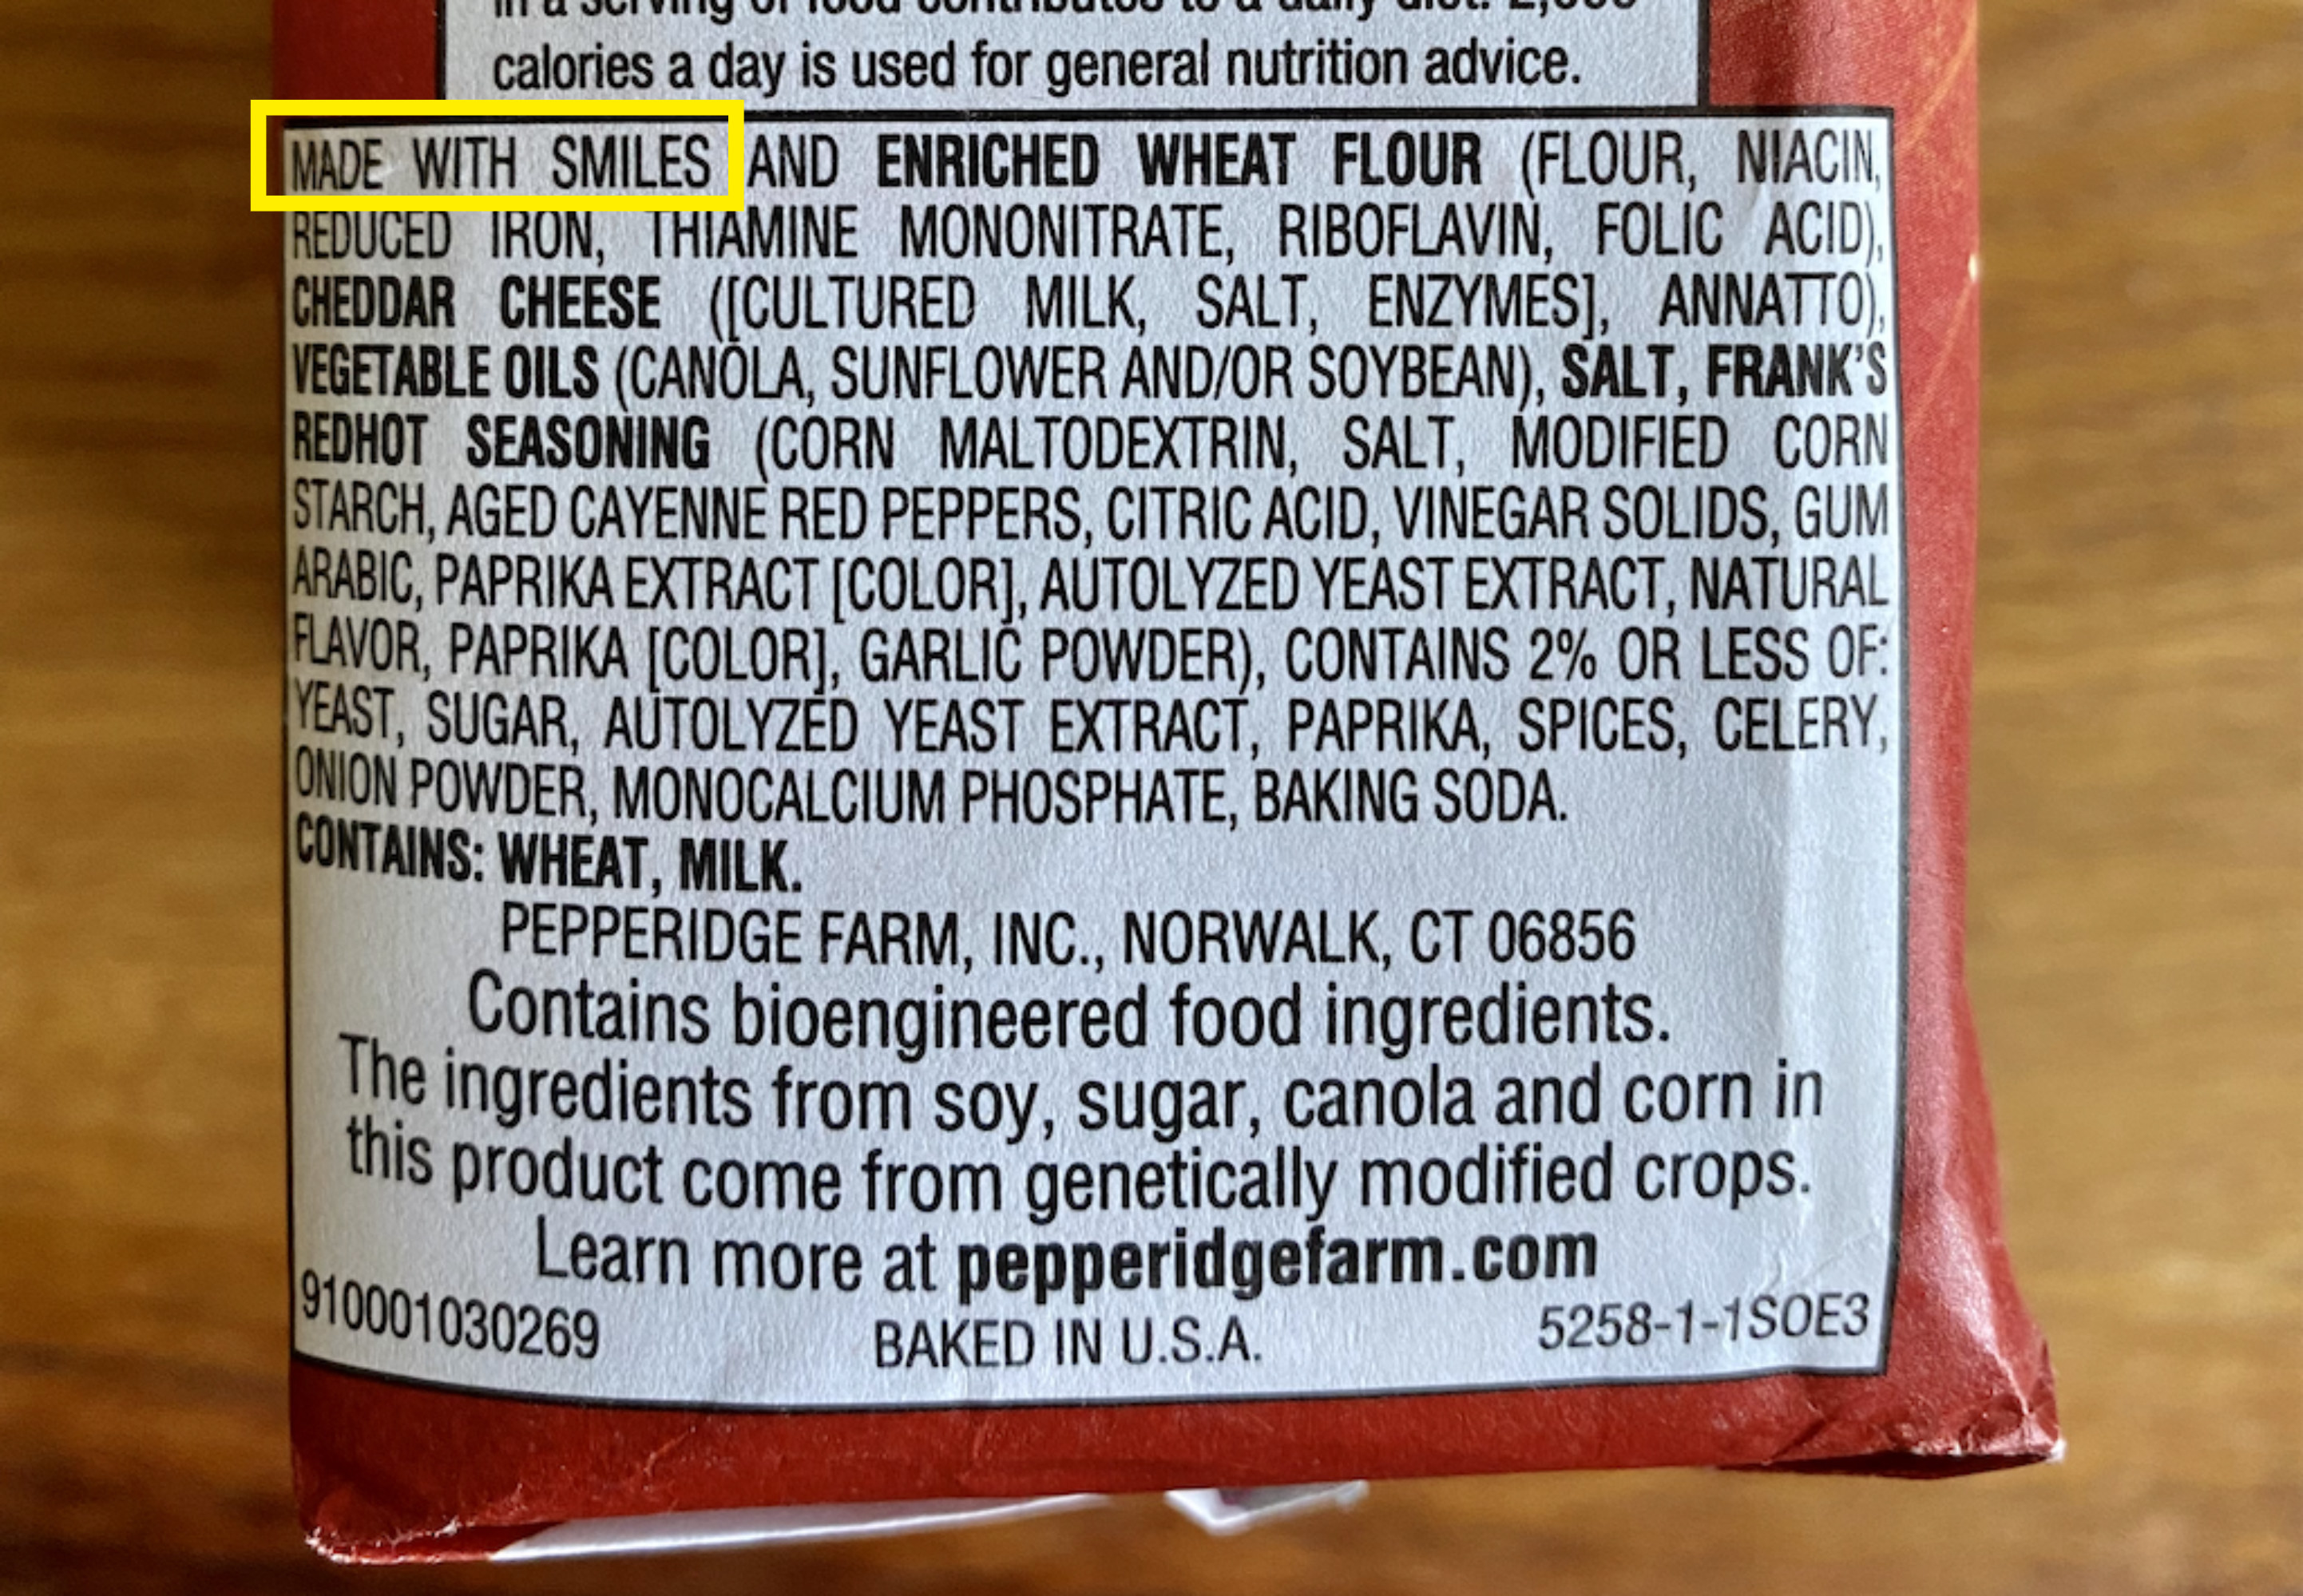 The ingredients of these Goldfish